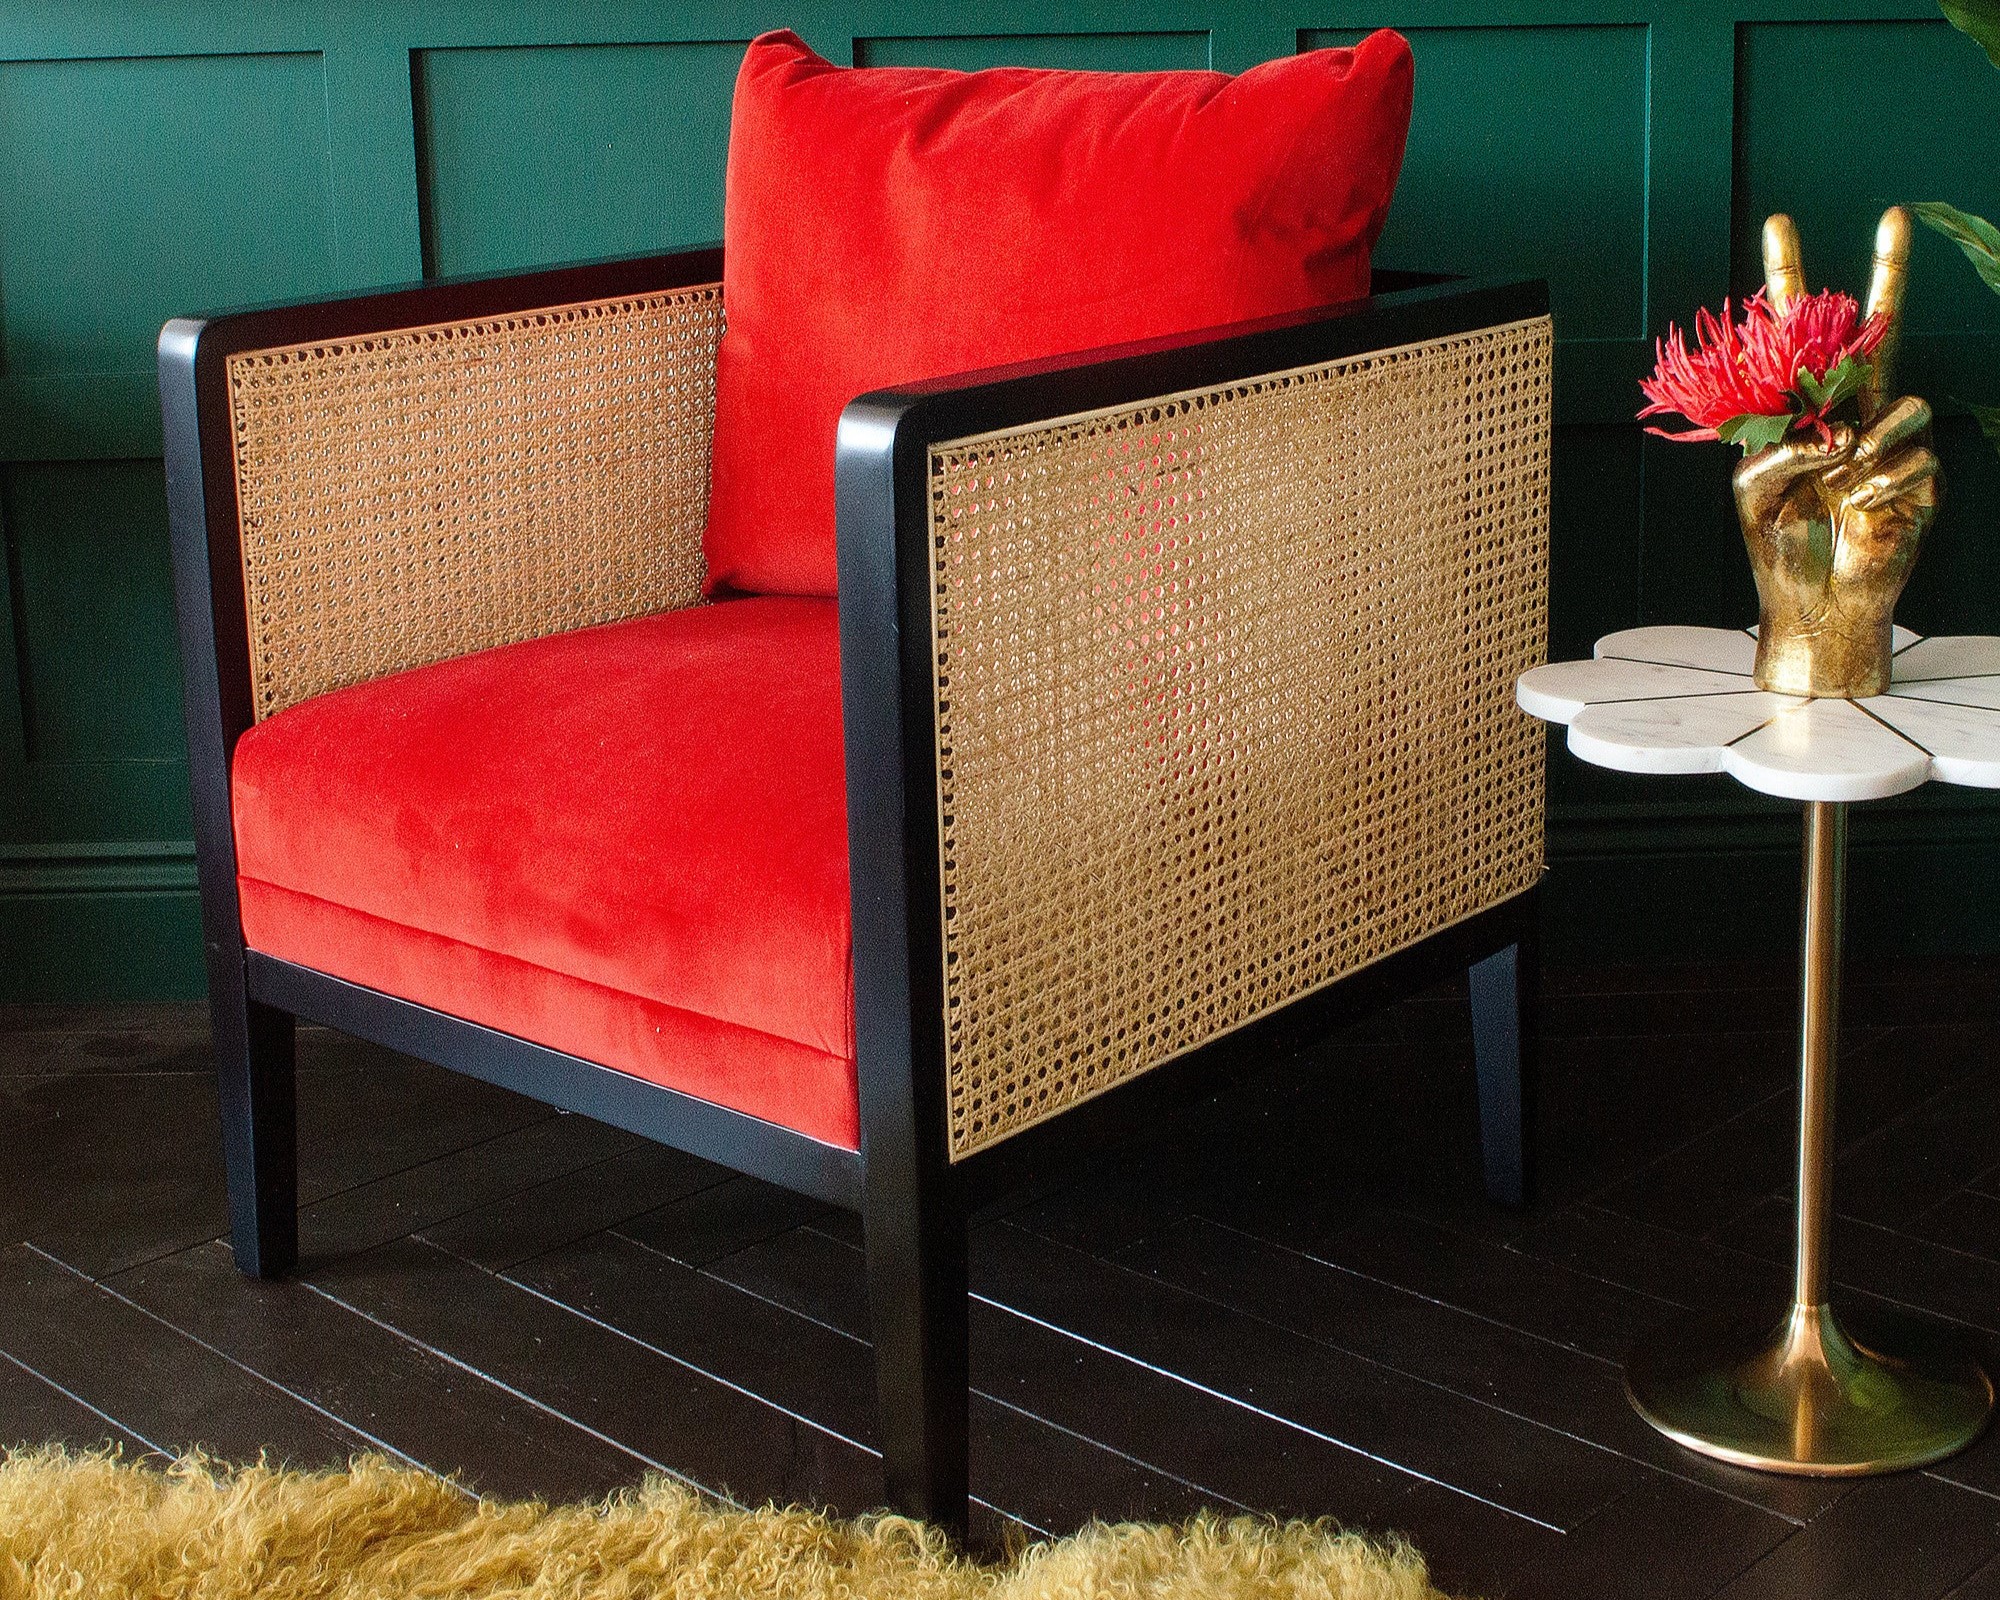 A red velvet rattan armchair with a black frame next to a side table